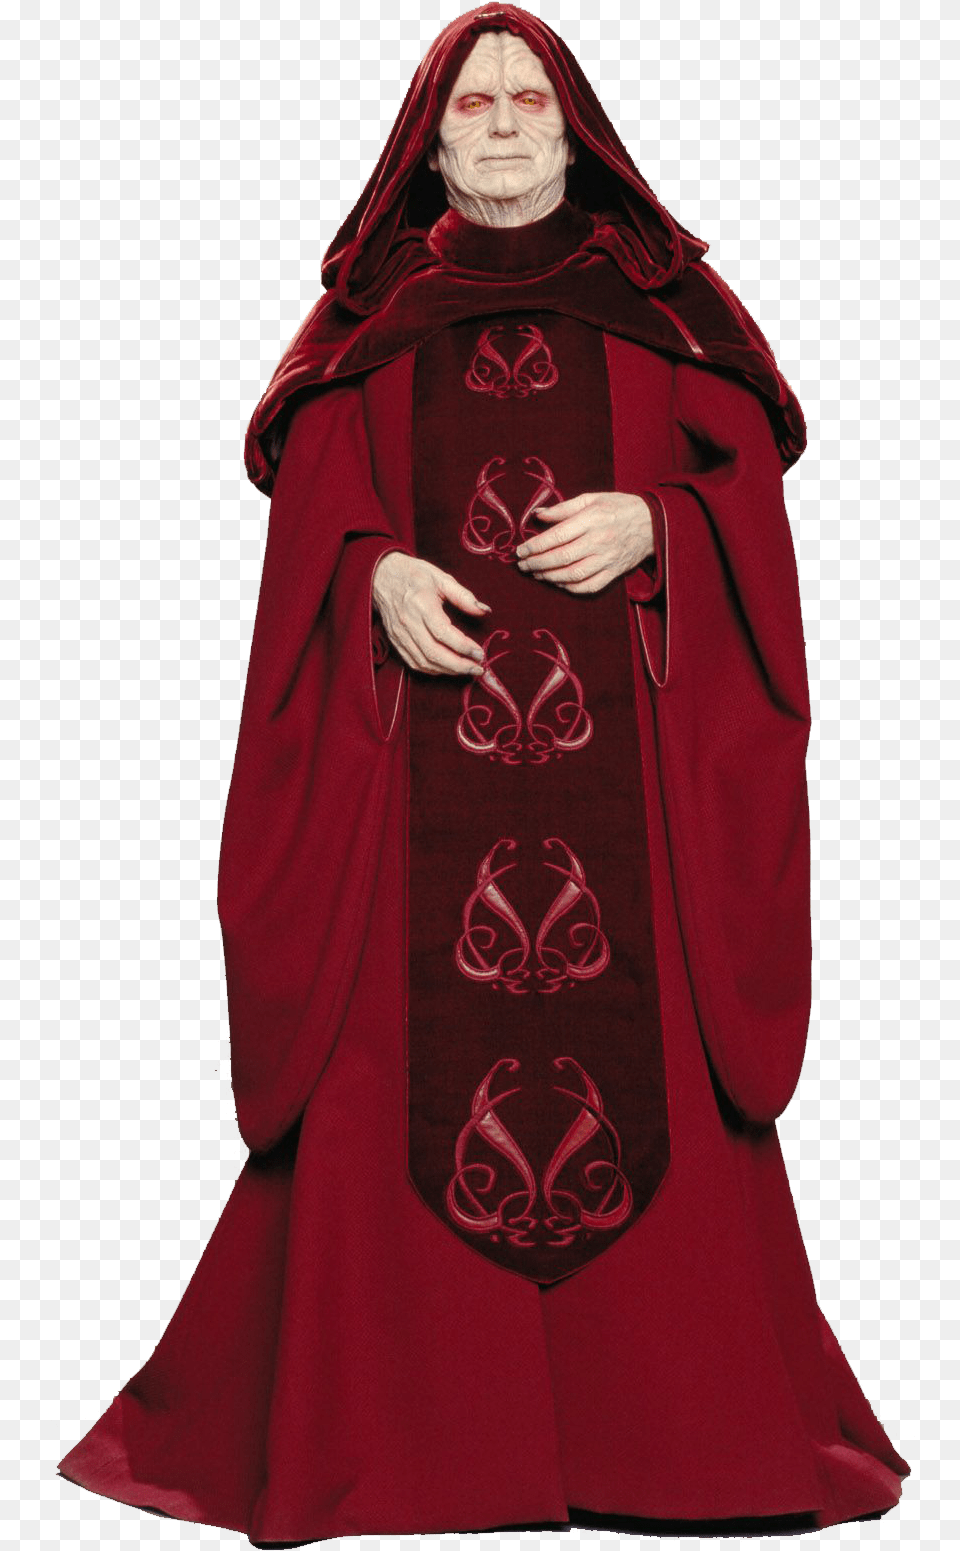 Darth Sidious Emperor Palpatine In Star Wars Battlefront 2 Palpatine Skins, Fashion, Adult, Female, Person Png